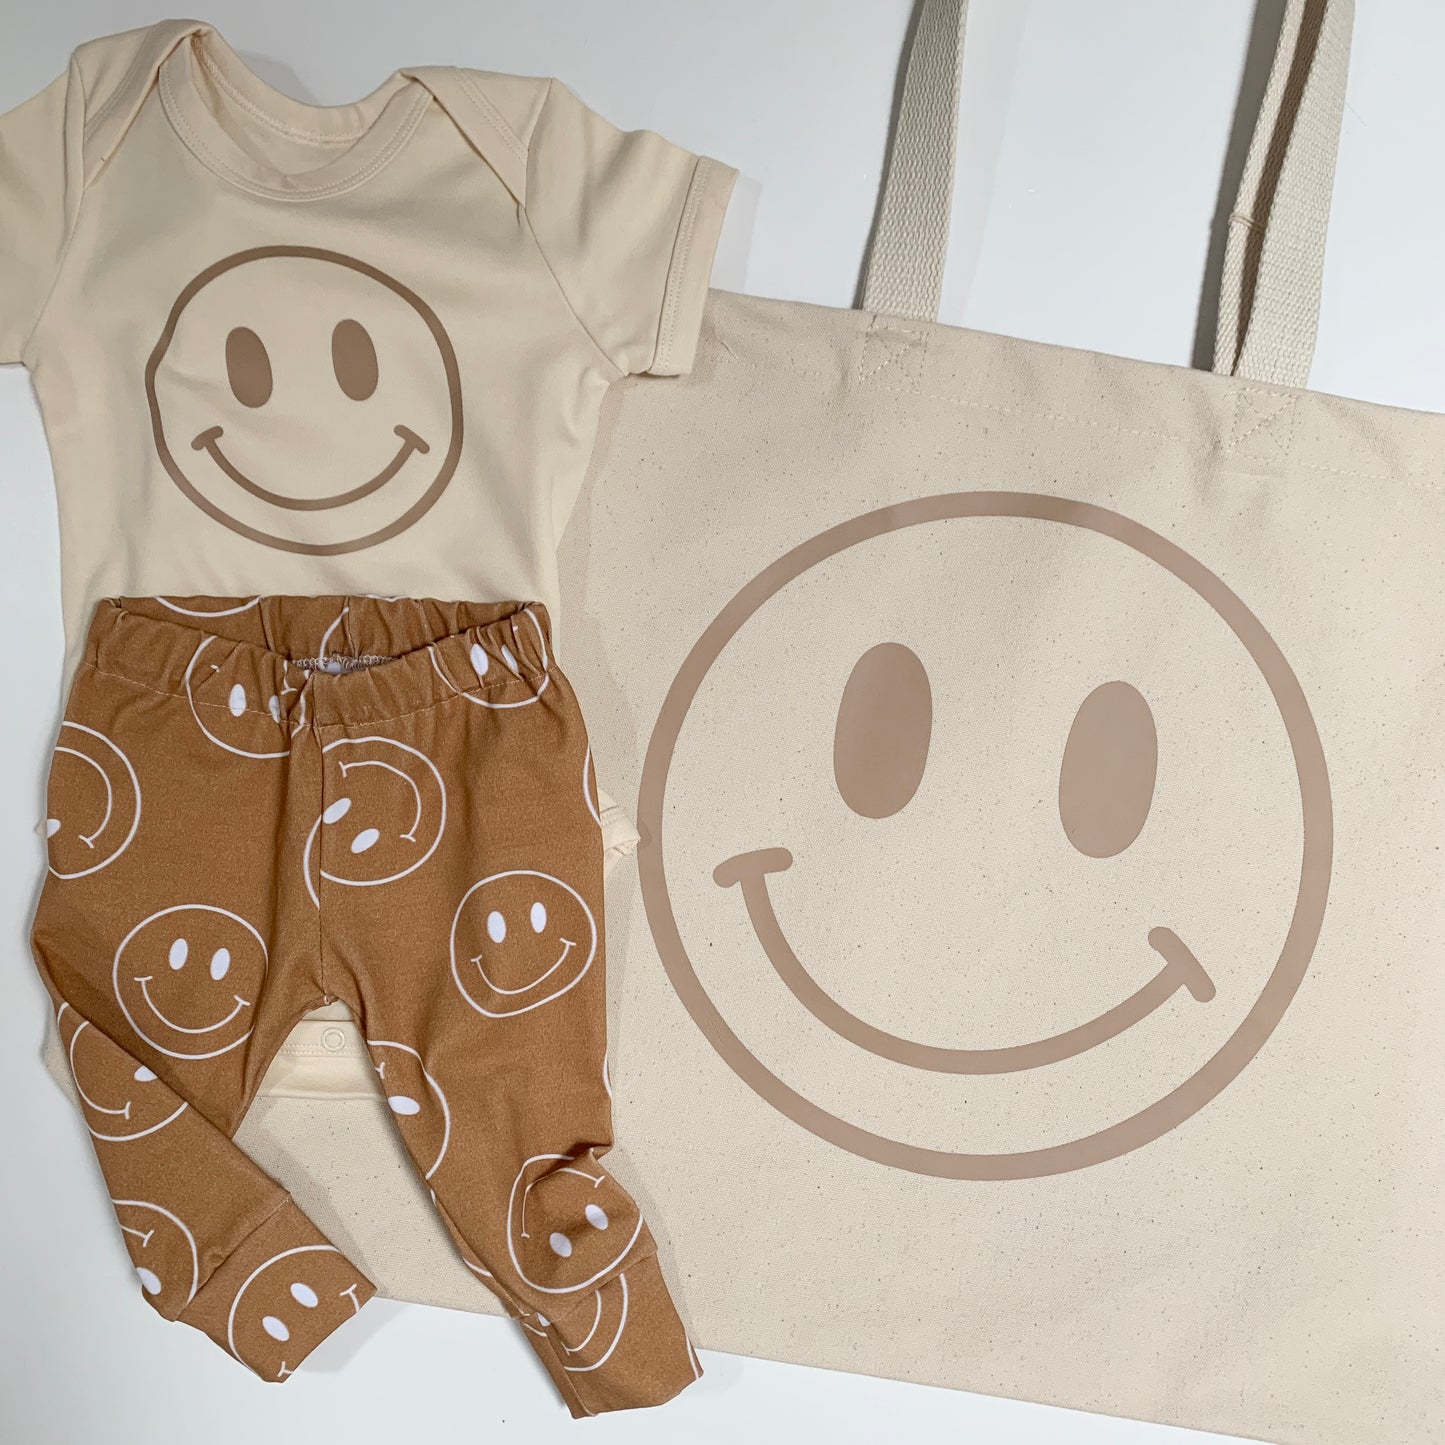 Smiley Face Oversized Tote Bag